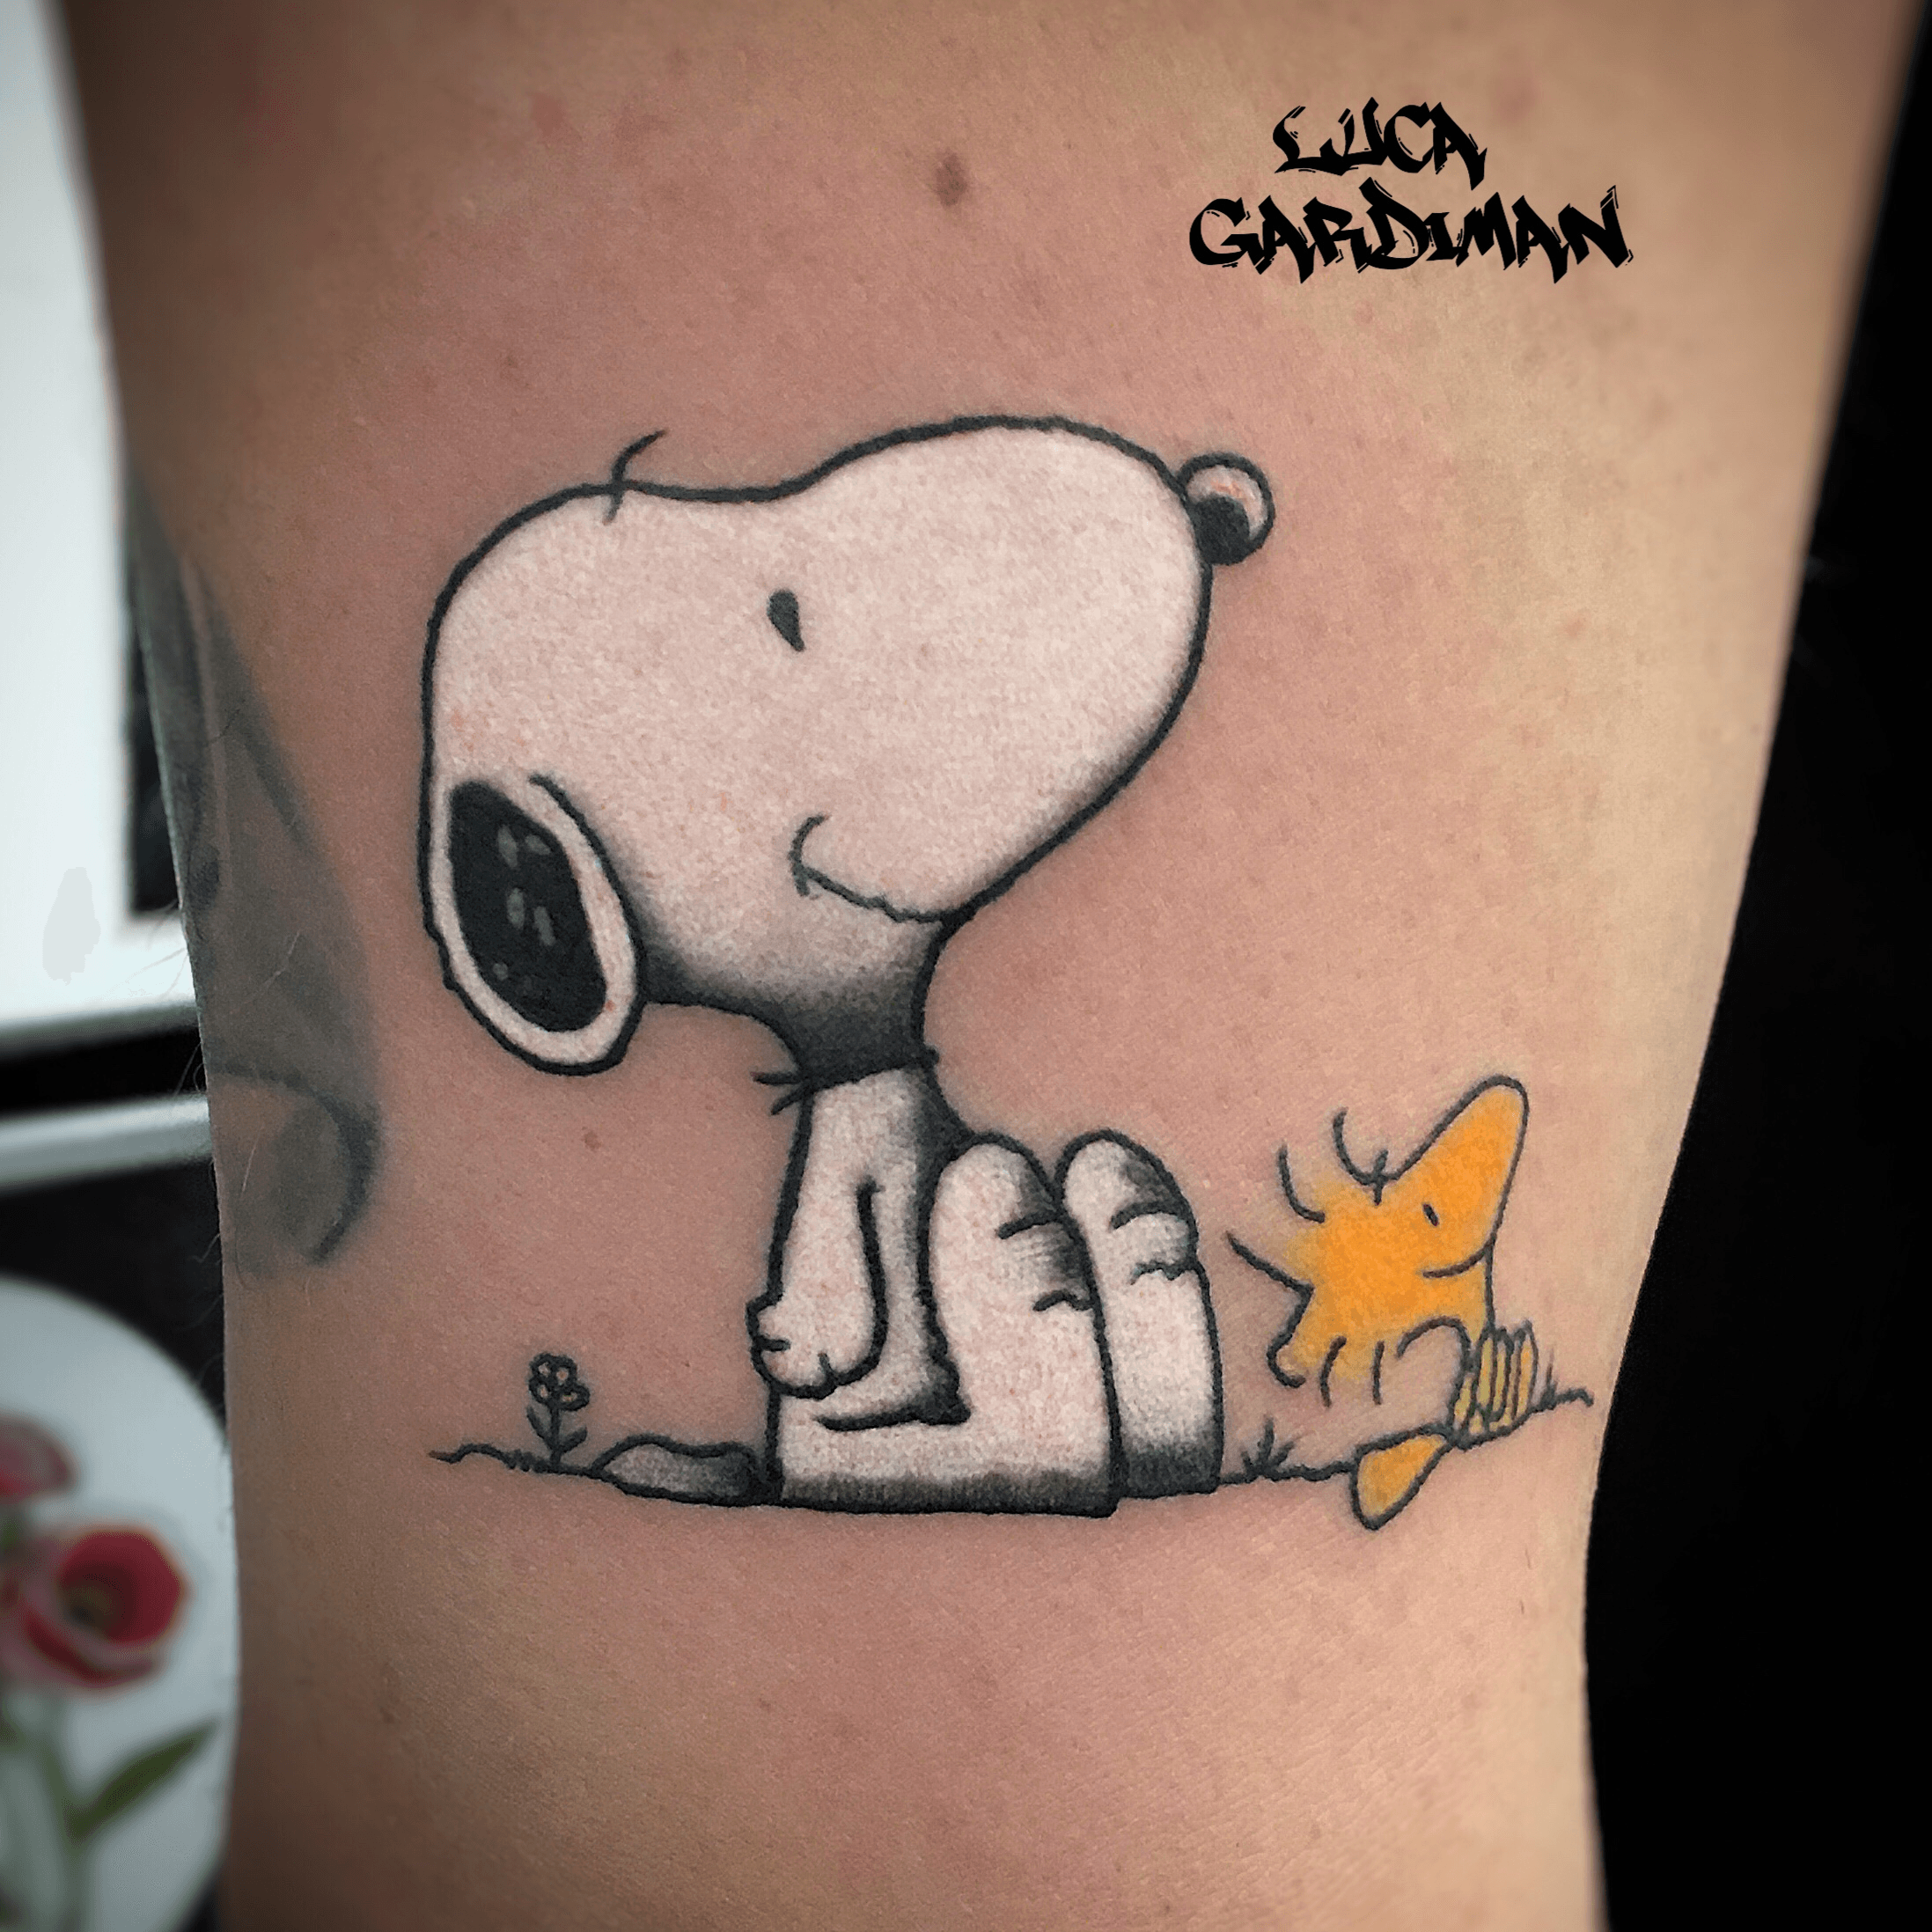 Snoopy and woodstock hugging each other tattoo on the